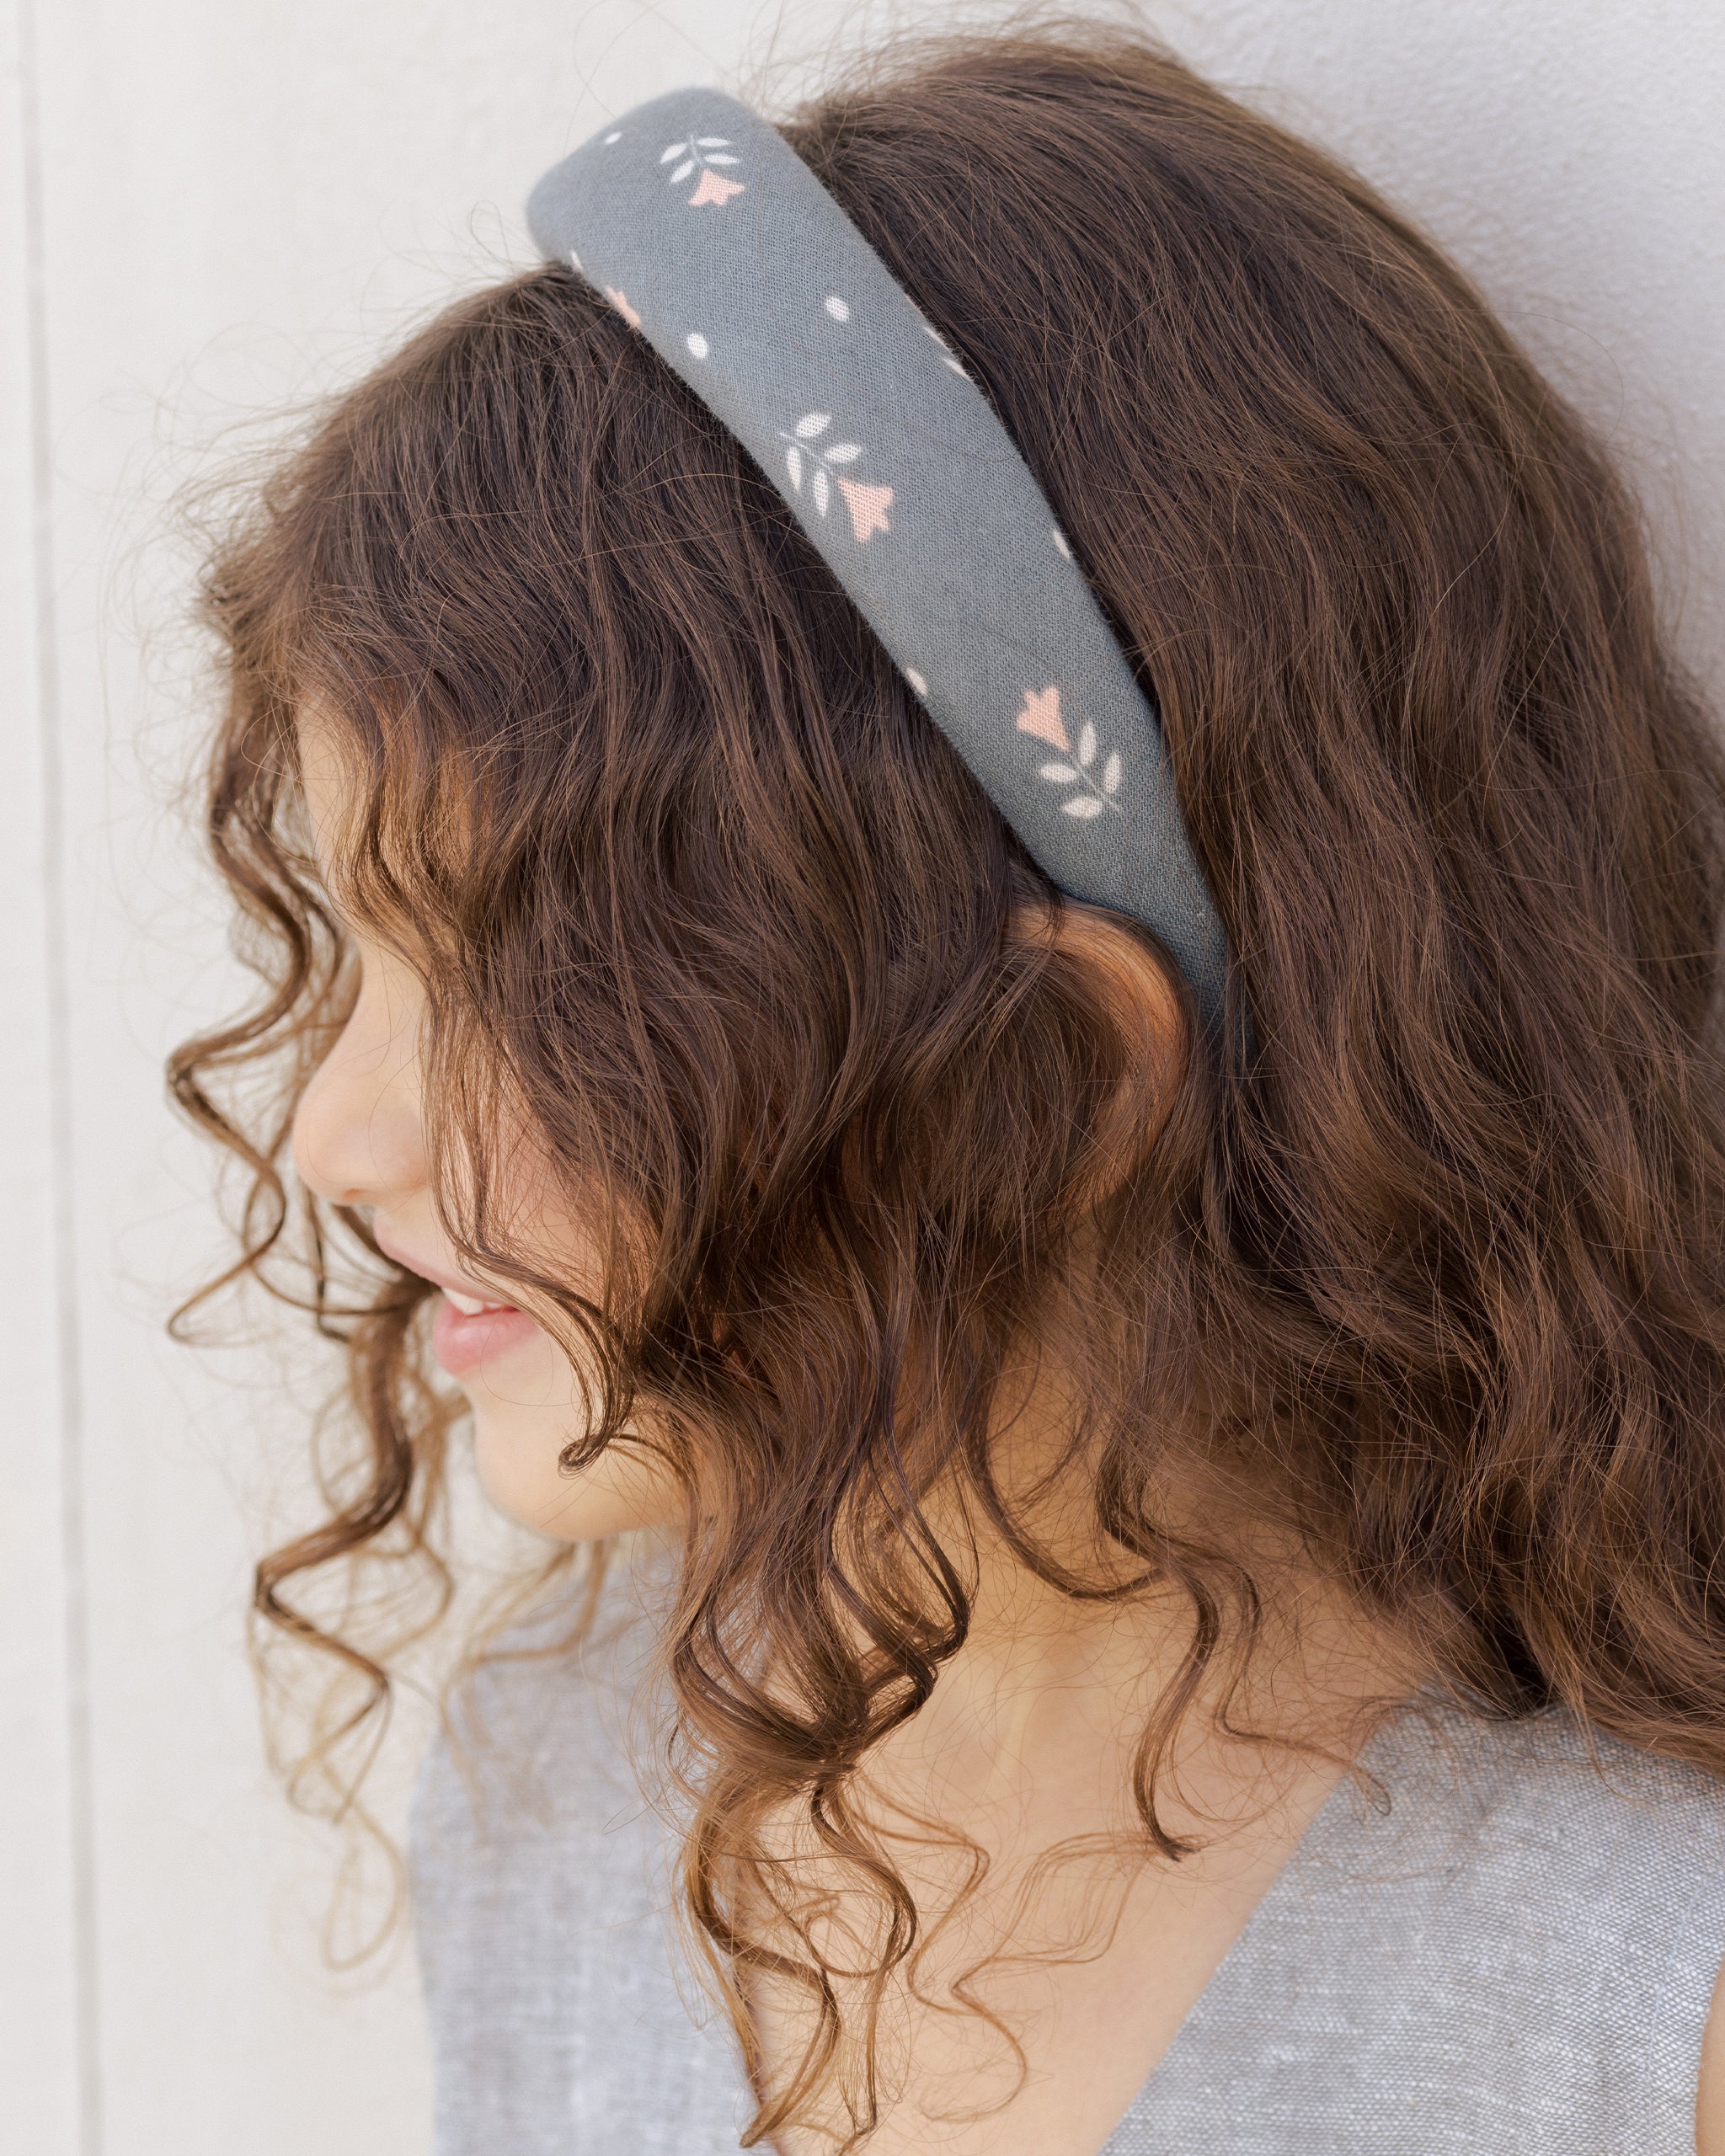 Padded Headband || Morning Glory - Rylee + Cru | Kids Clothes | Trendy Baby Clothes | Modern Infant Outfits |